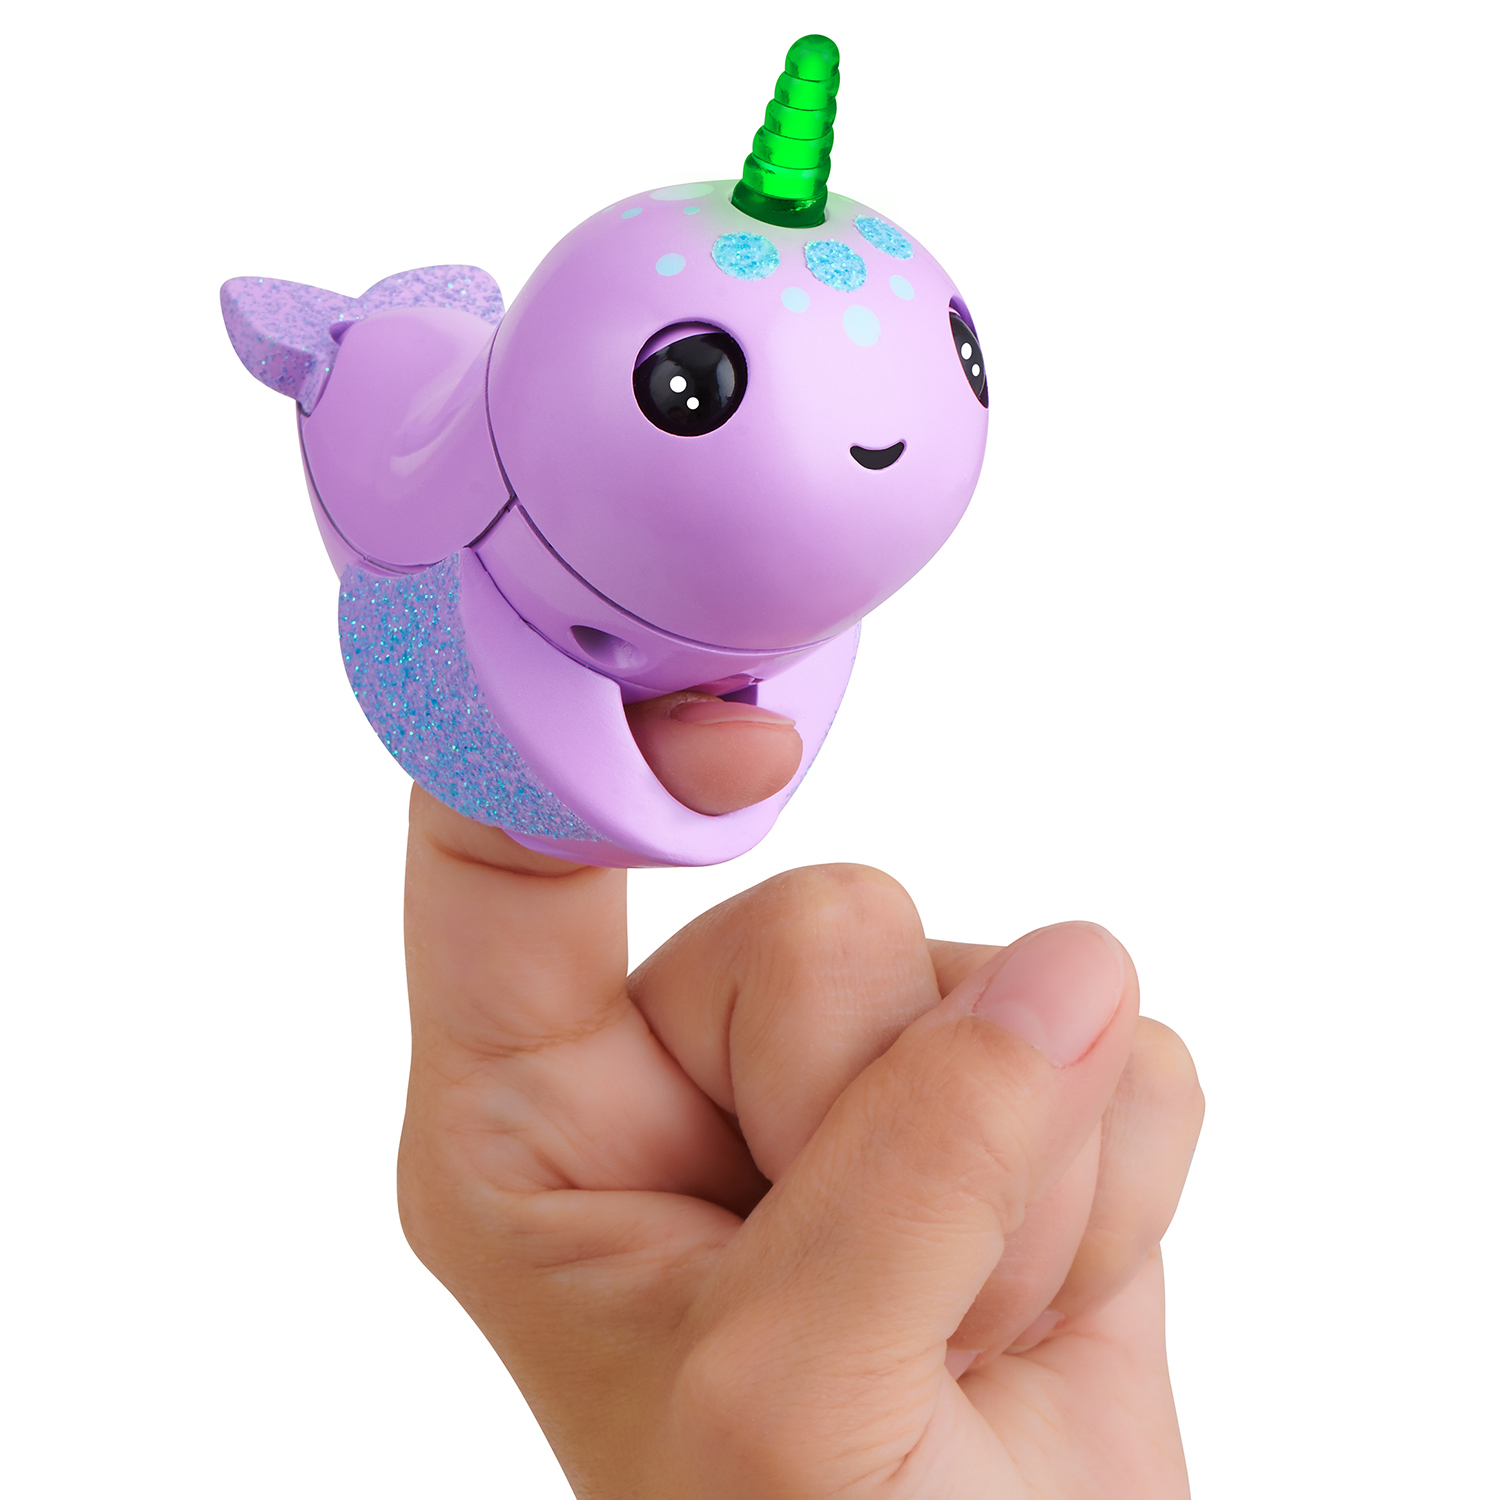 Fingerlings Light Up Narwhal - Nelly (Purple) - Friendly Interactive Toy by WowWee - image 1 of 10